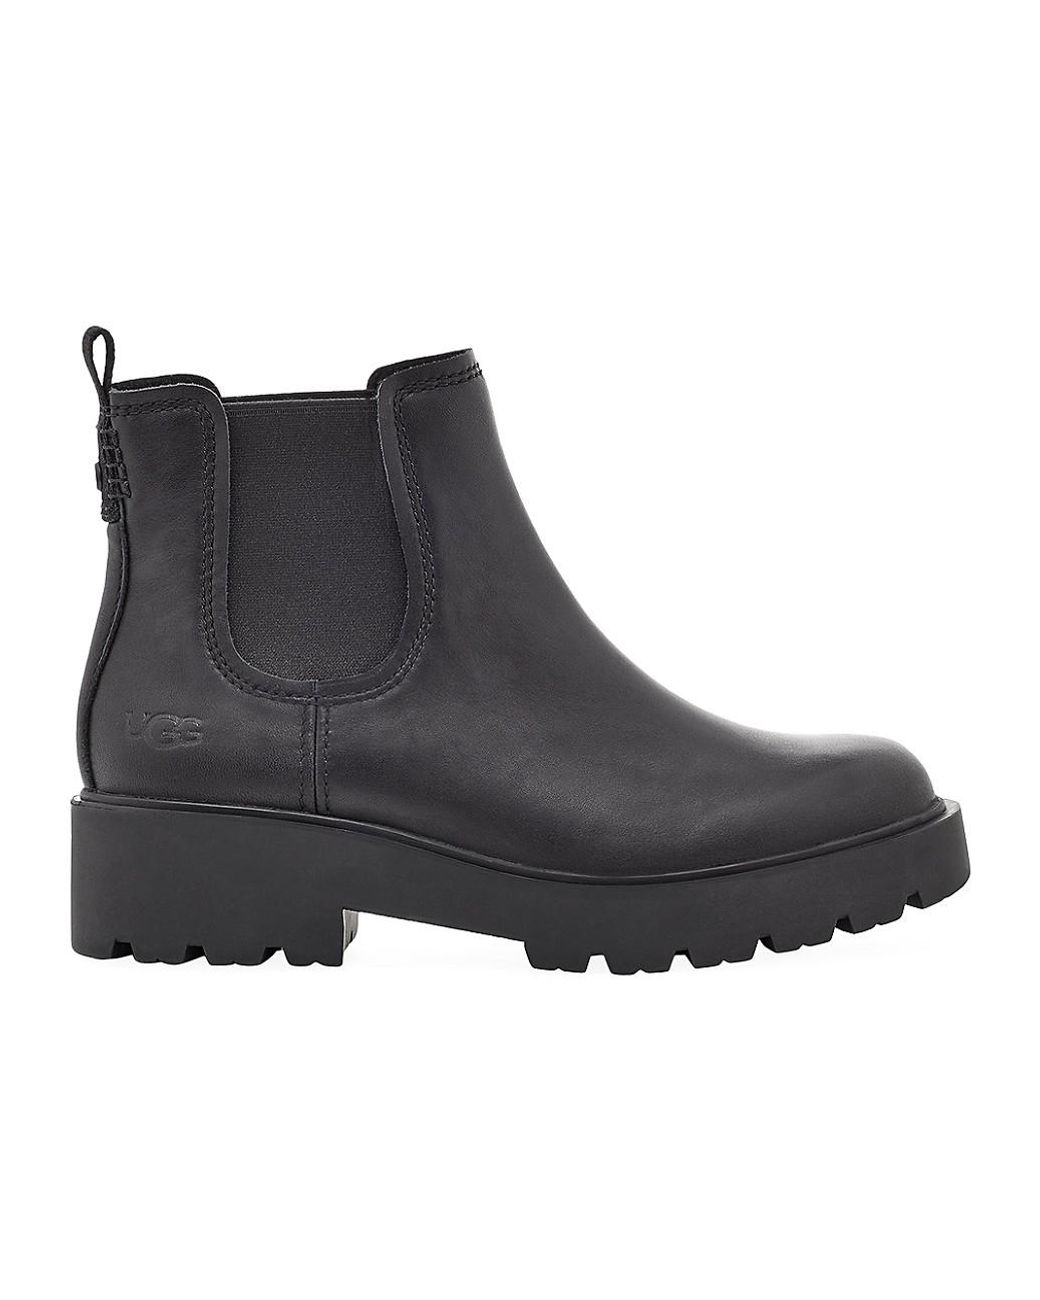 UGG Markstrum Leather Chelsea Boots in Black - Lyst